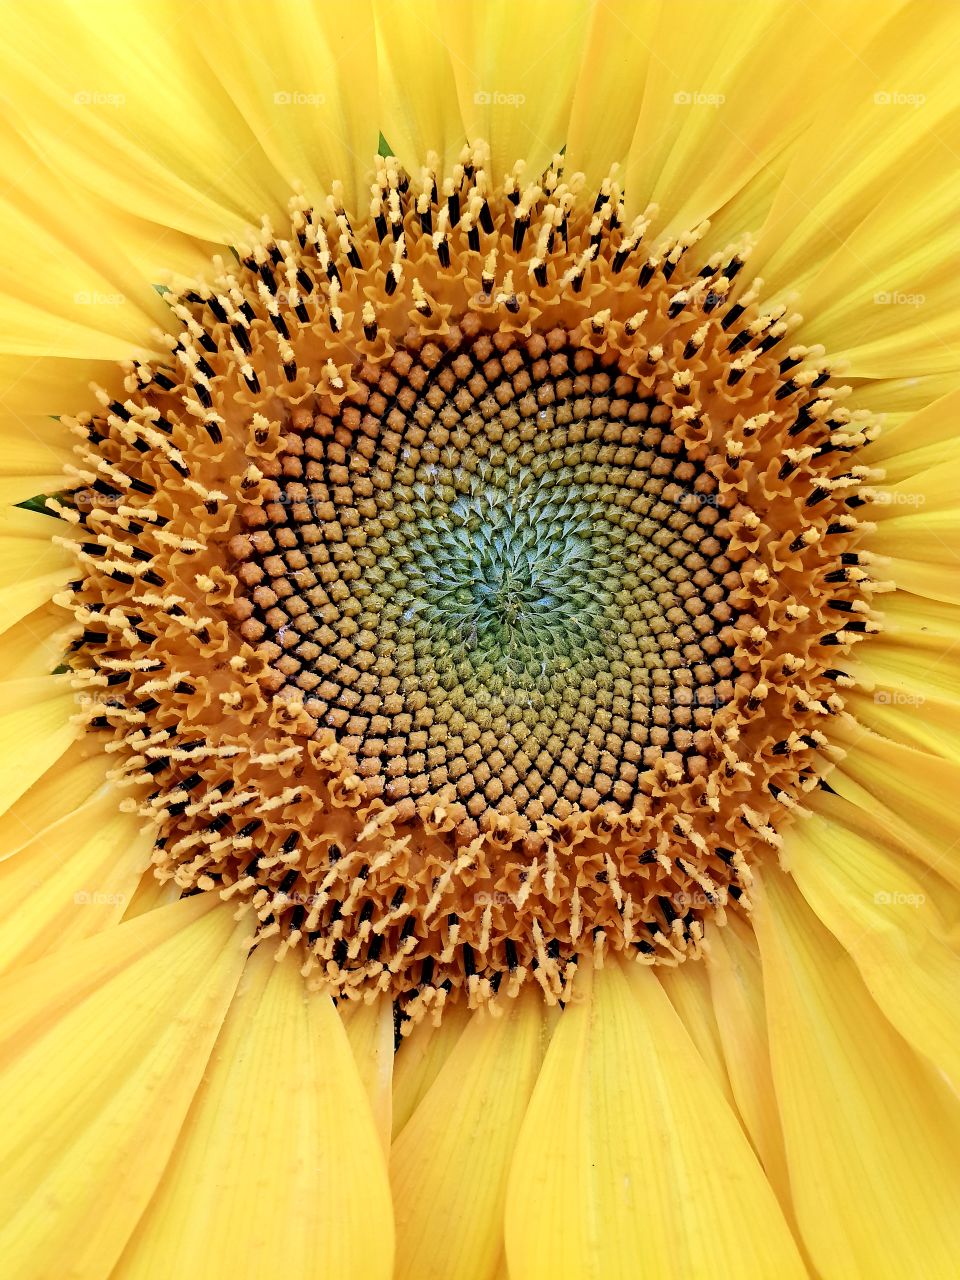 The centre of our beautiful sunflower